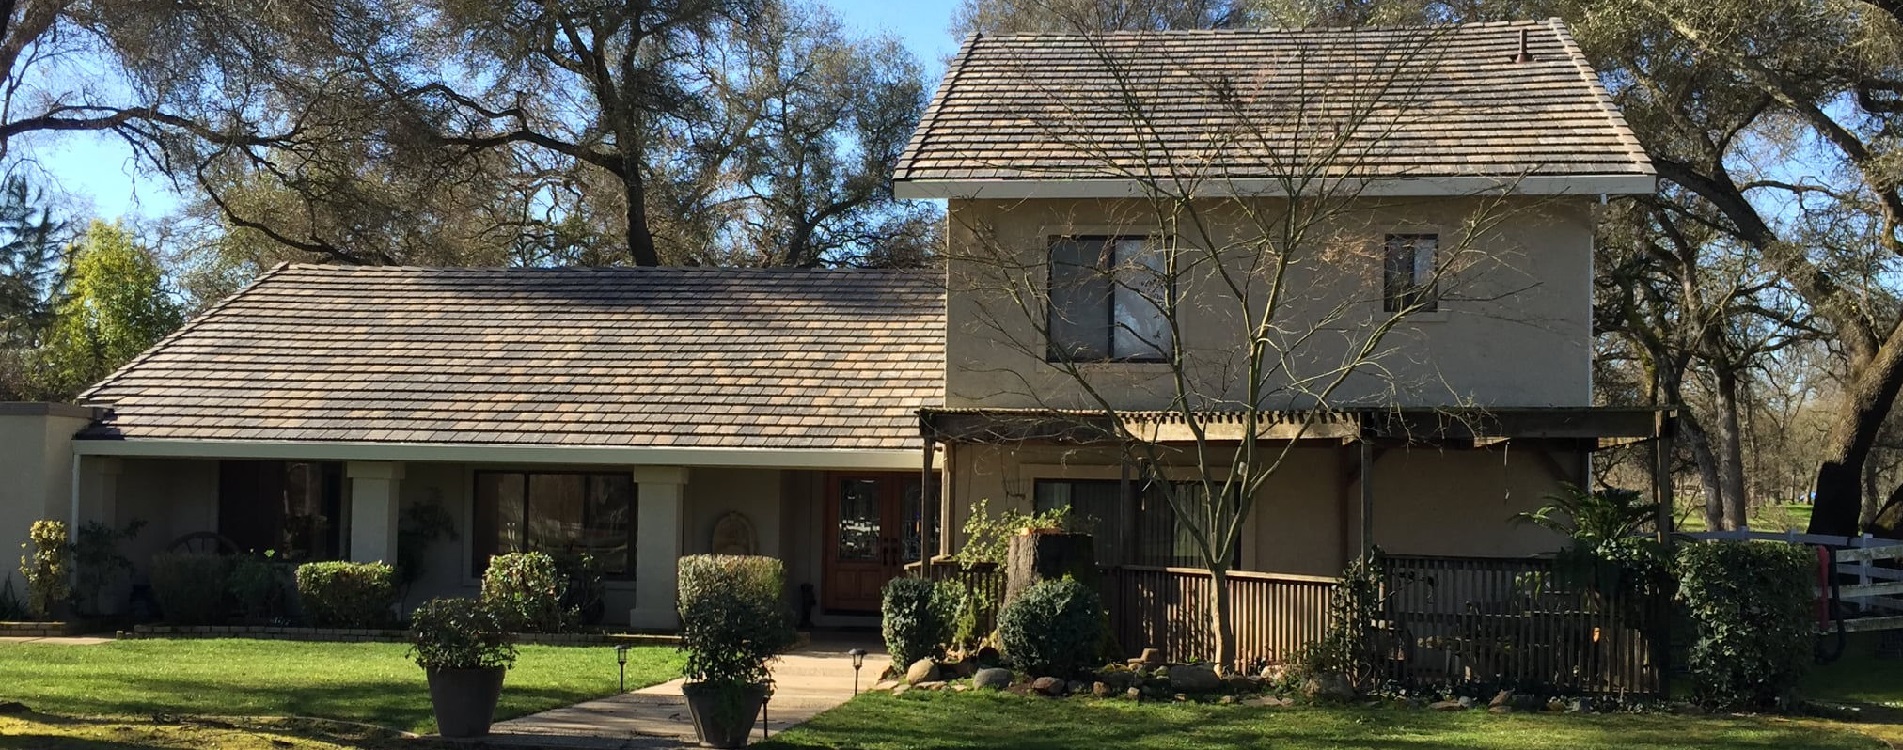 Loomis roofer roofer Loomis roofer replacement Loomis residential roofer Loomis commercial roofer Loomis el dorado county placer county Loomis CA Roofers Residential Commercial Roofer Loomis CA